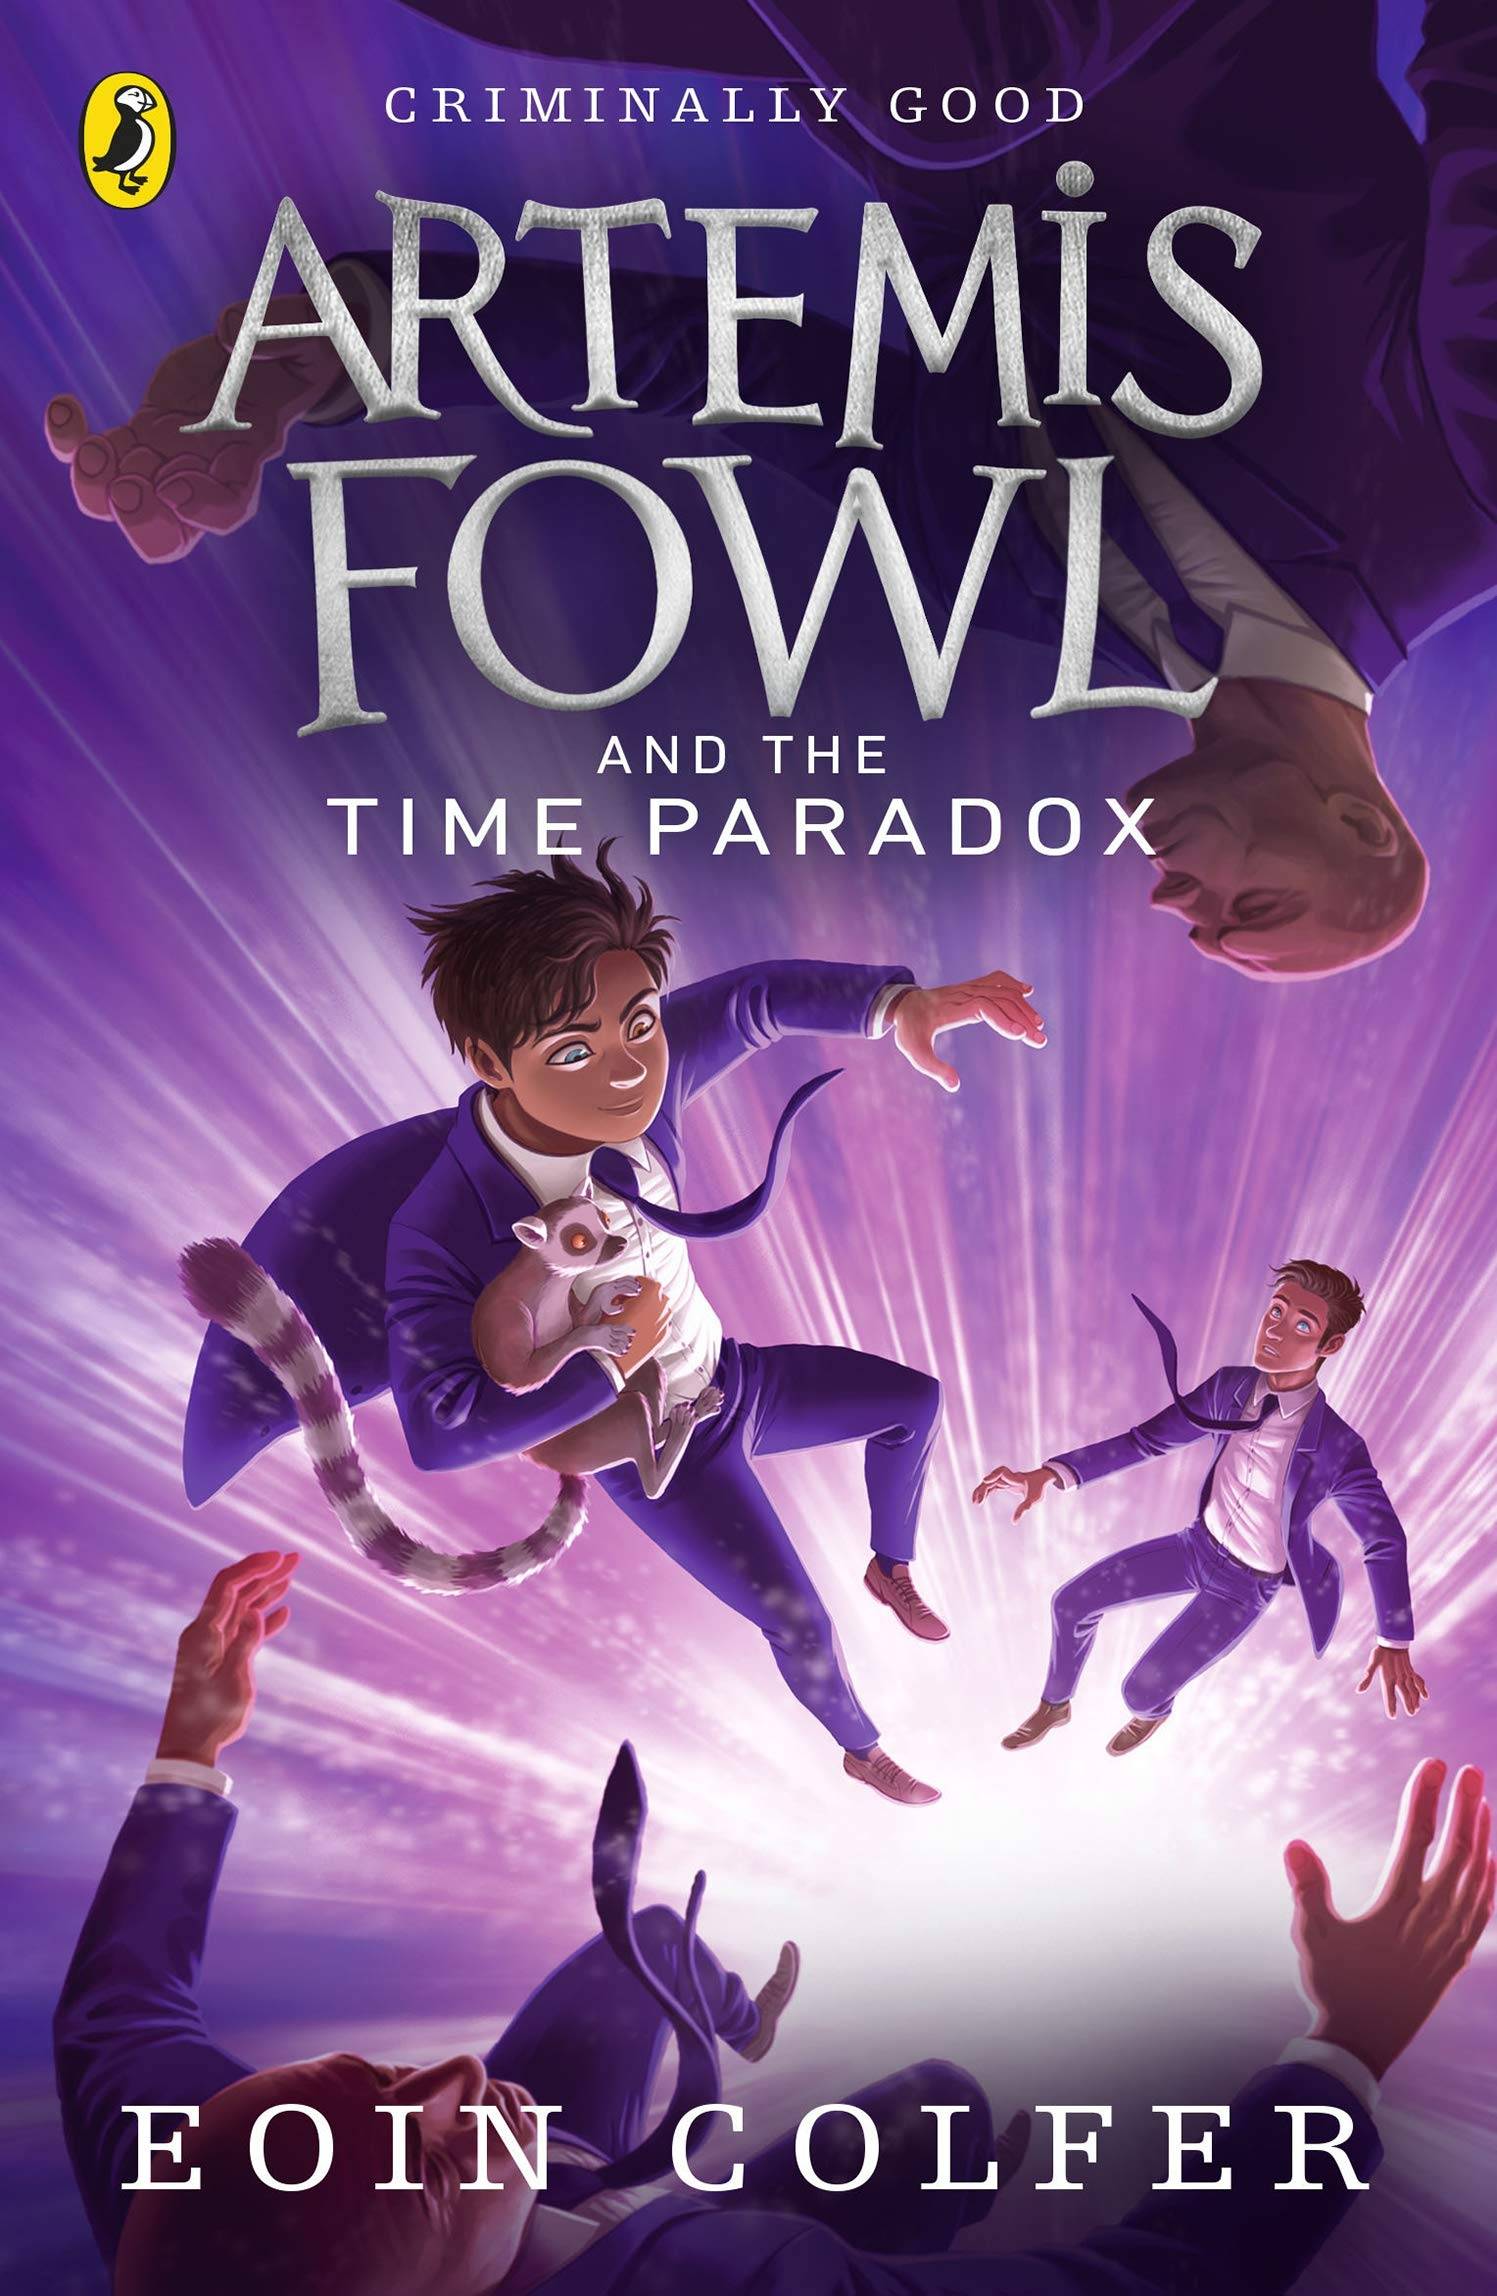 IMG : Artemis Fowl And The Time Paradox #6